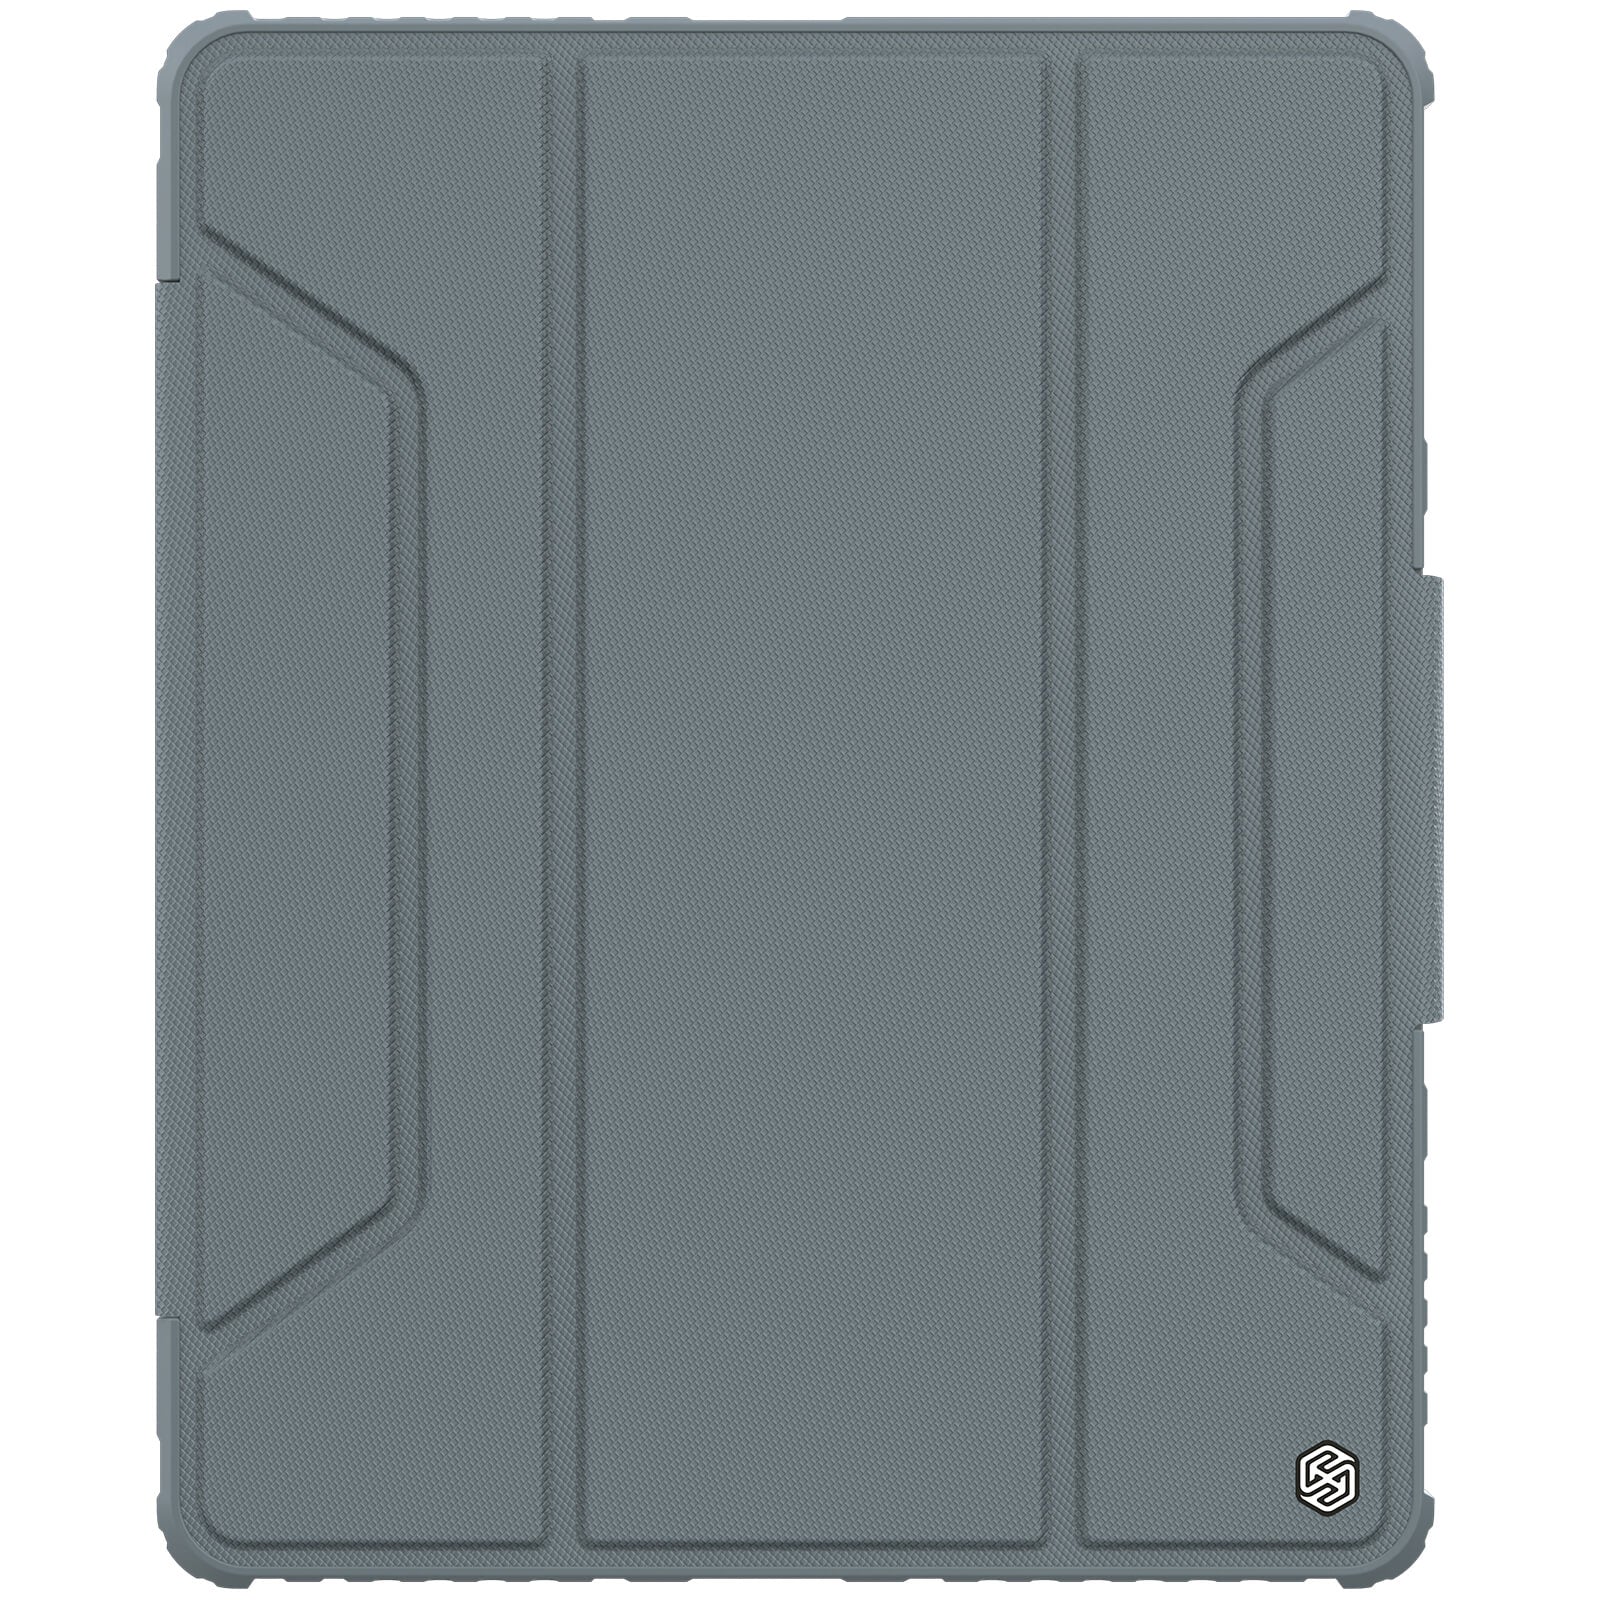 Fierce Armor rugged case for iPad Pro 11”/12.9" 2021 2020_positive side_gray